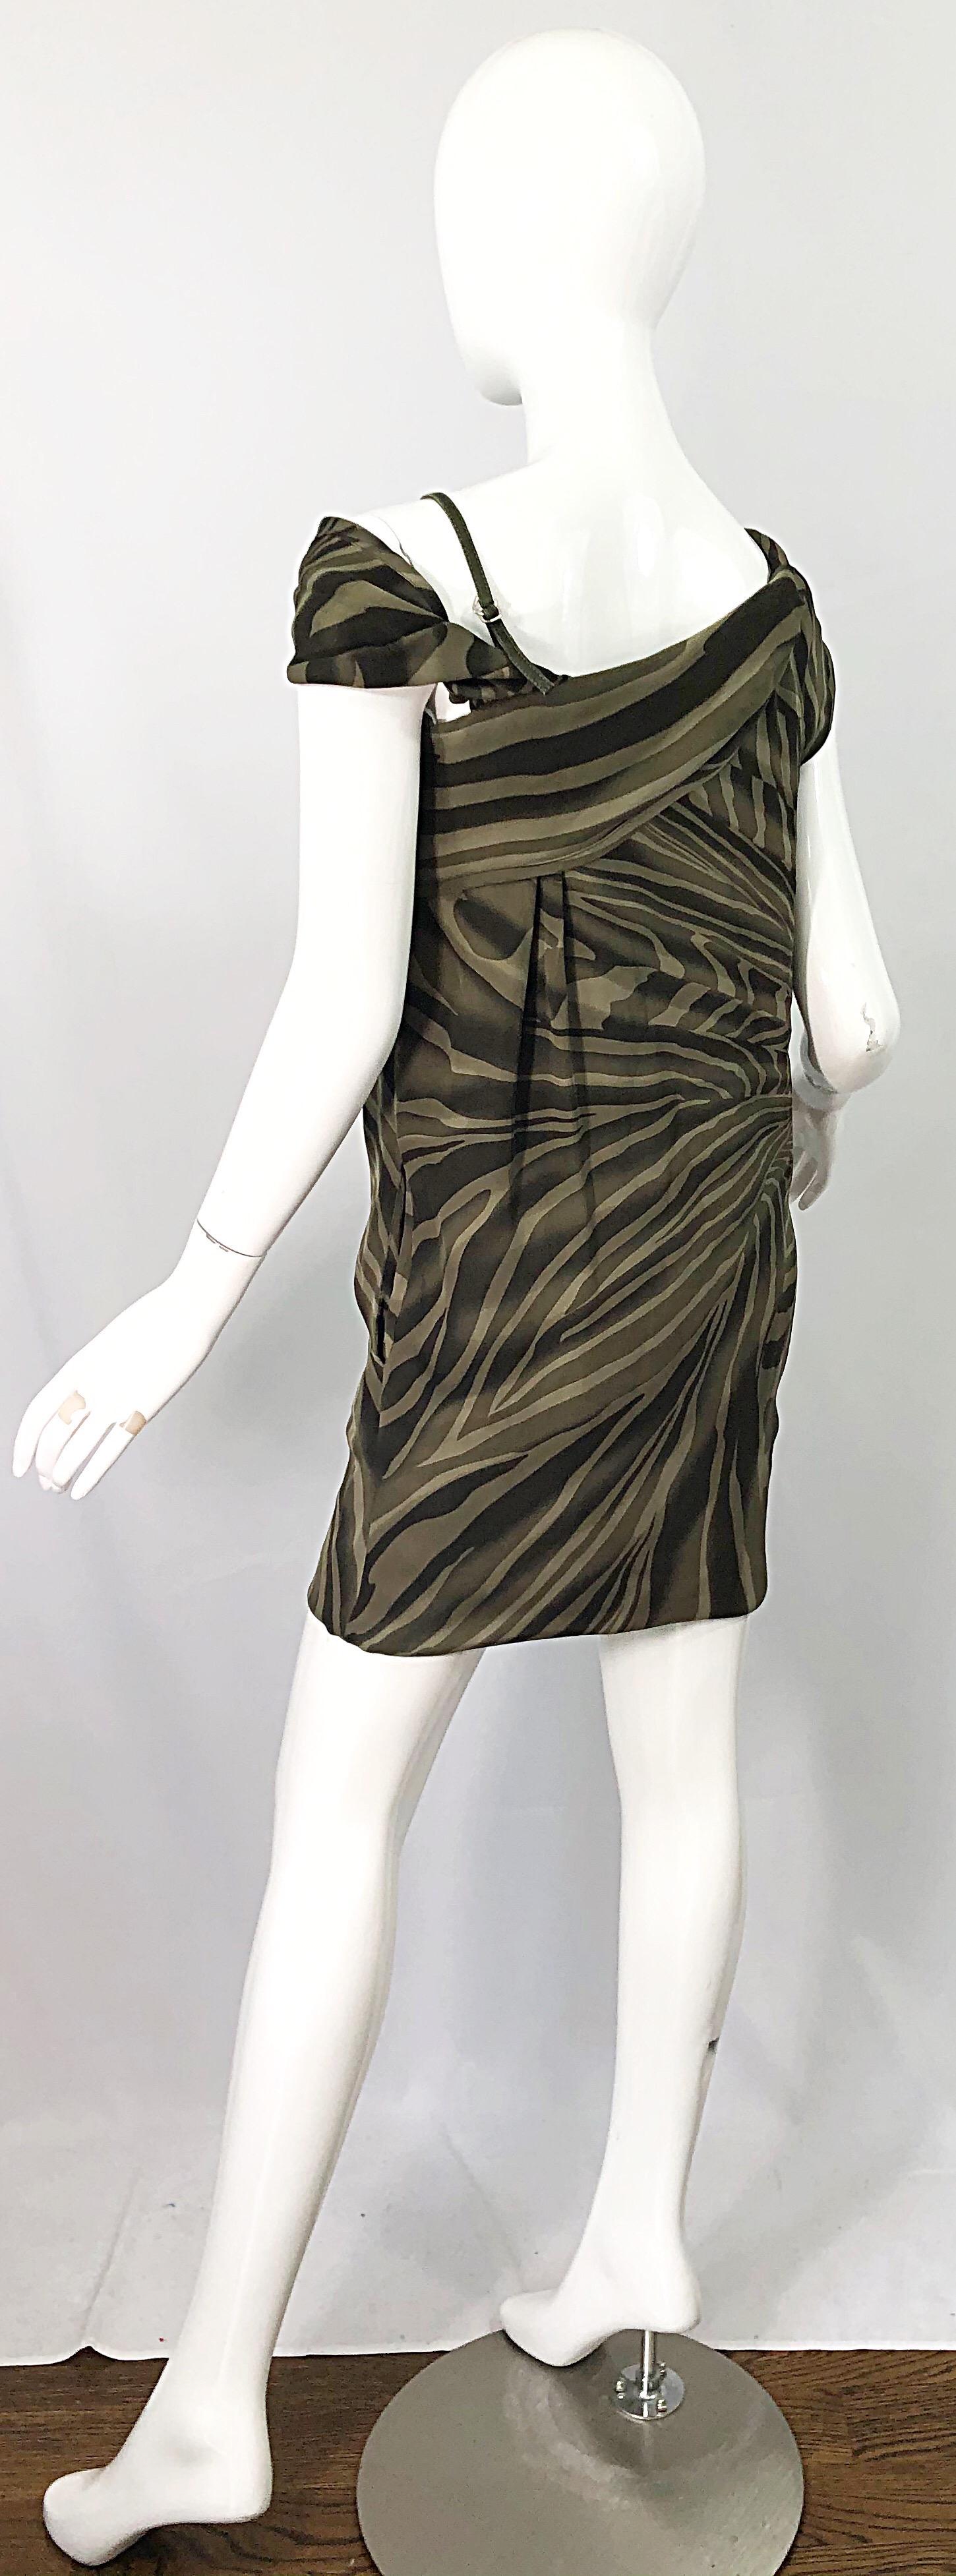 Tom Ford for Gucci Olive + Khaki Zebra Safari Print Silk Off Shoulder Dress In Excellent Condition For Sale In San Diego, CA